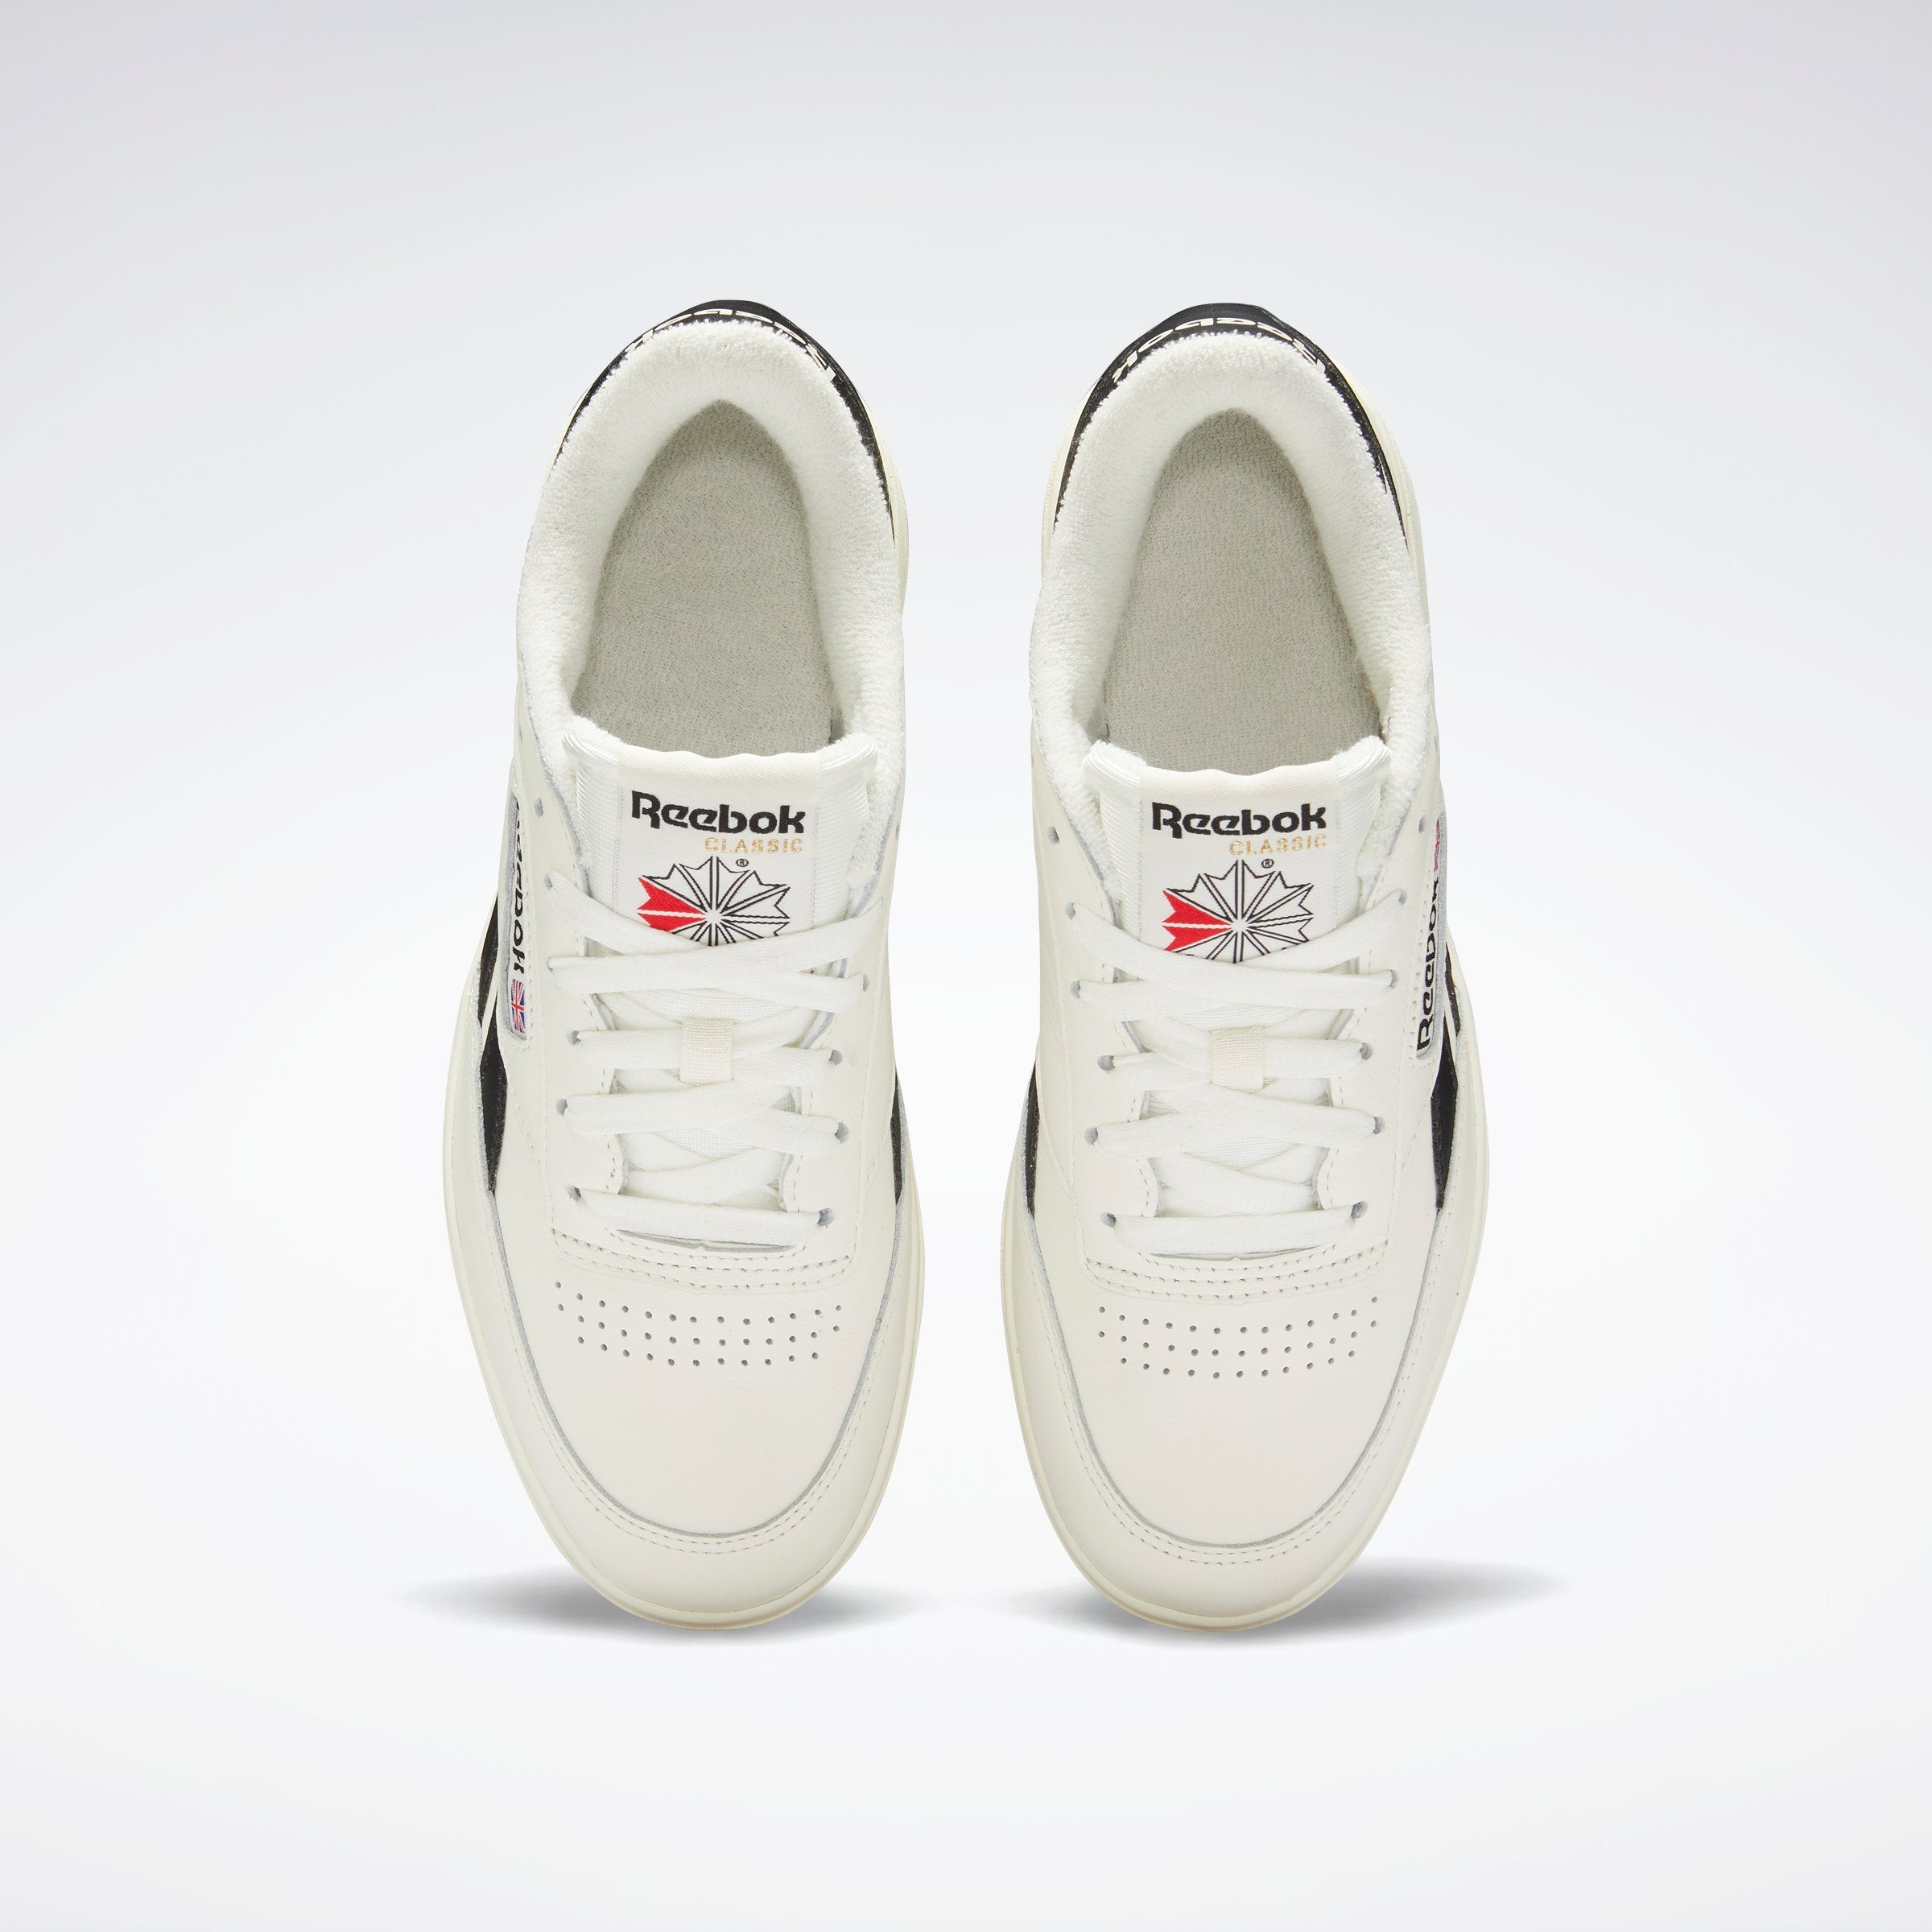 Classic DOUBLE offwhite Reebok Plateausneaker CLUB C